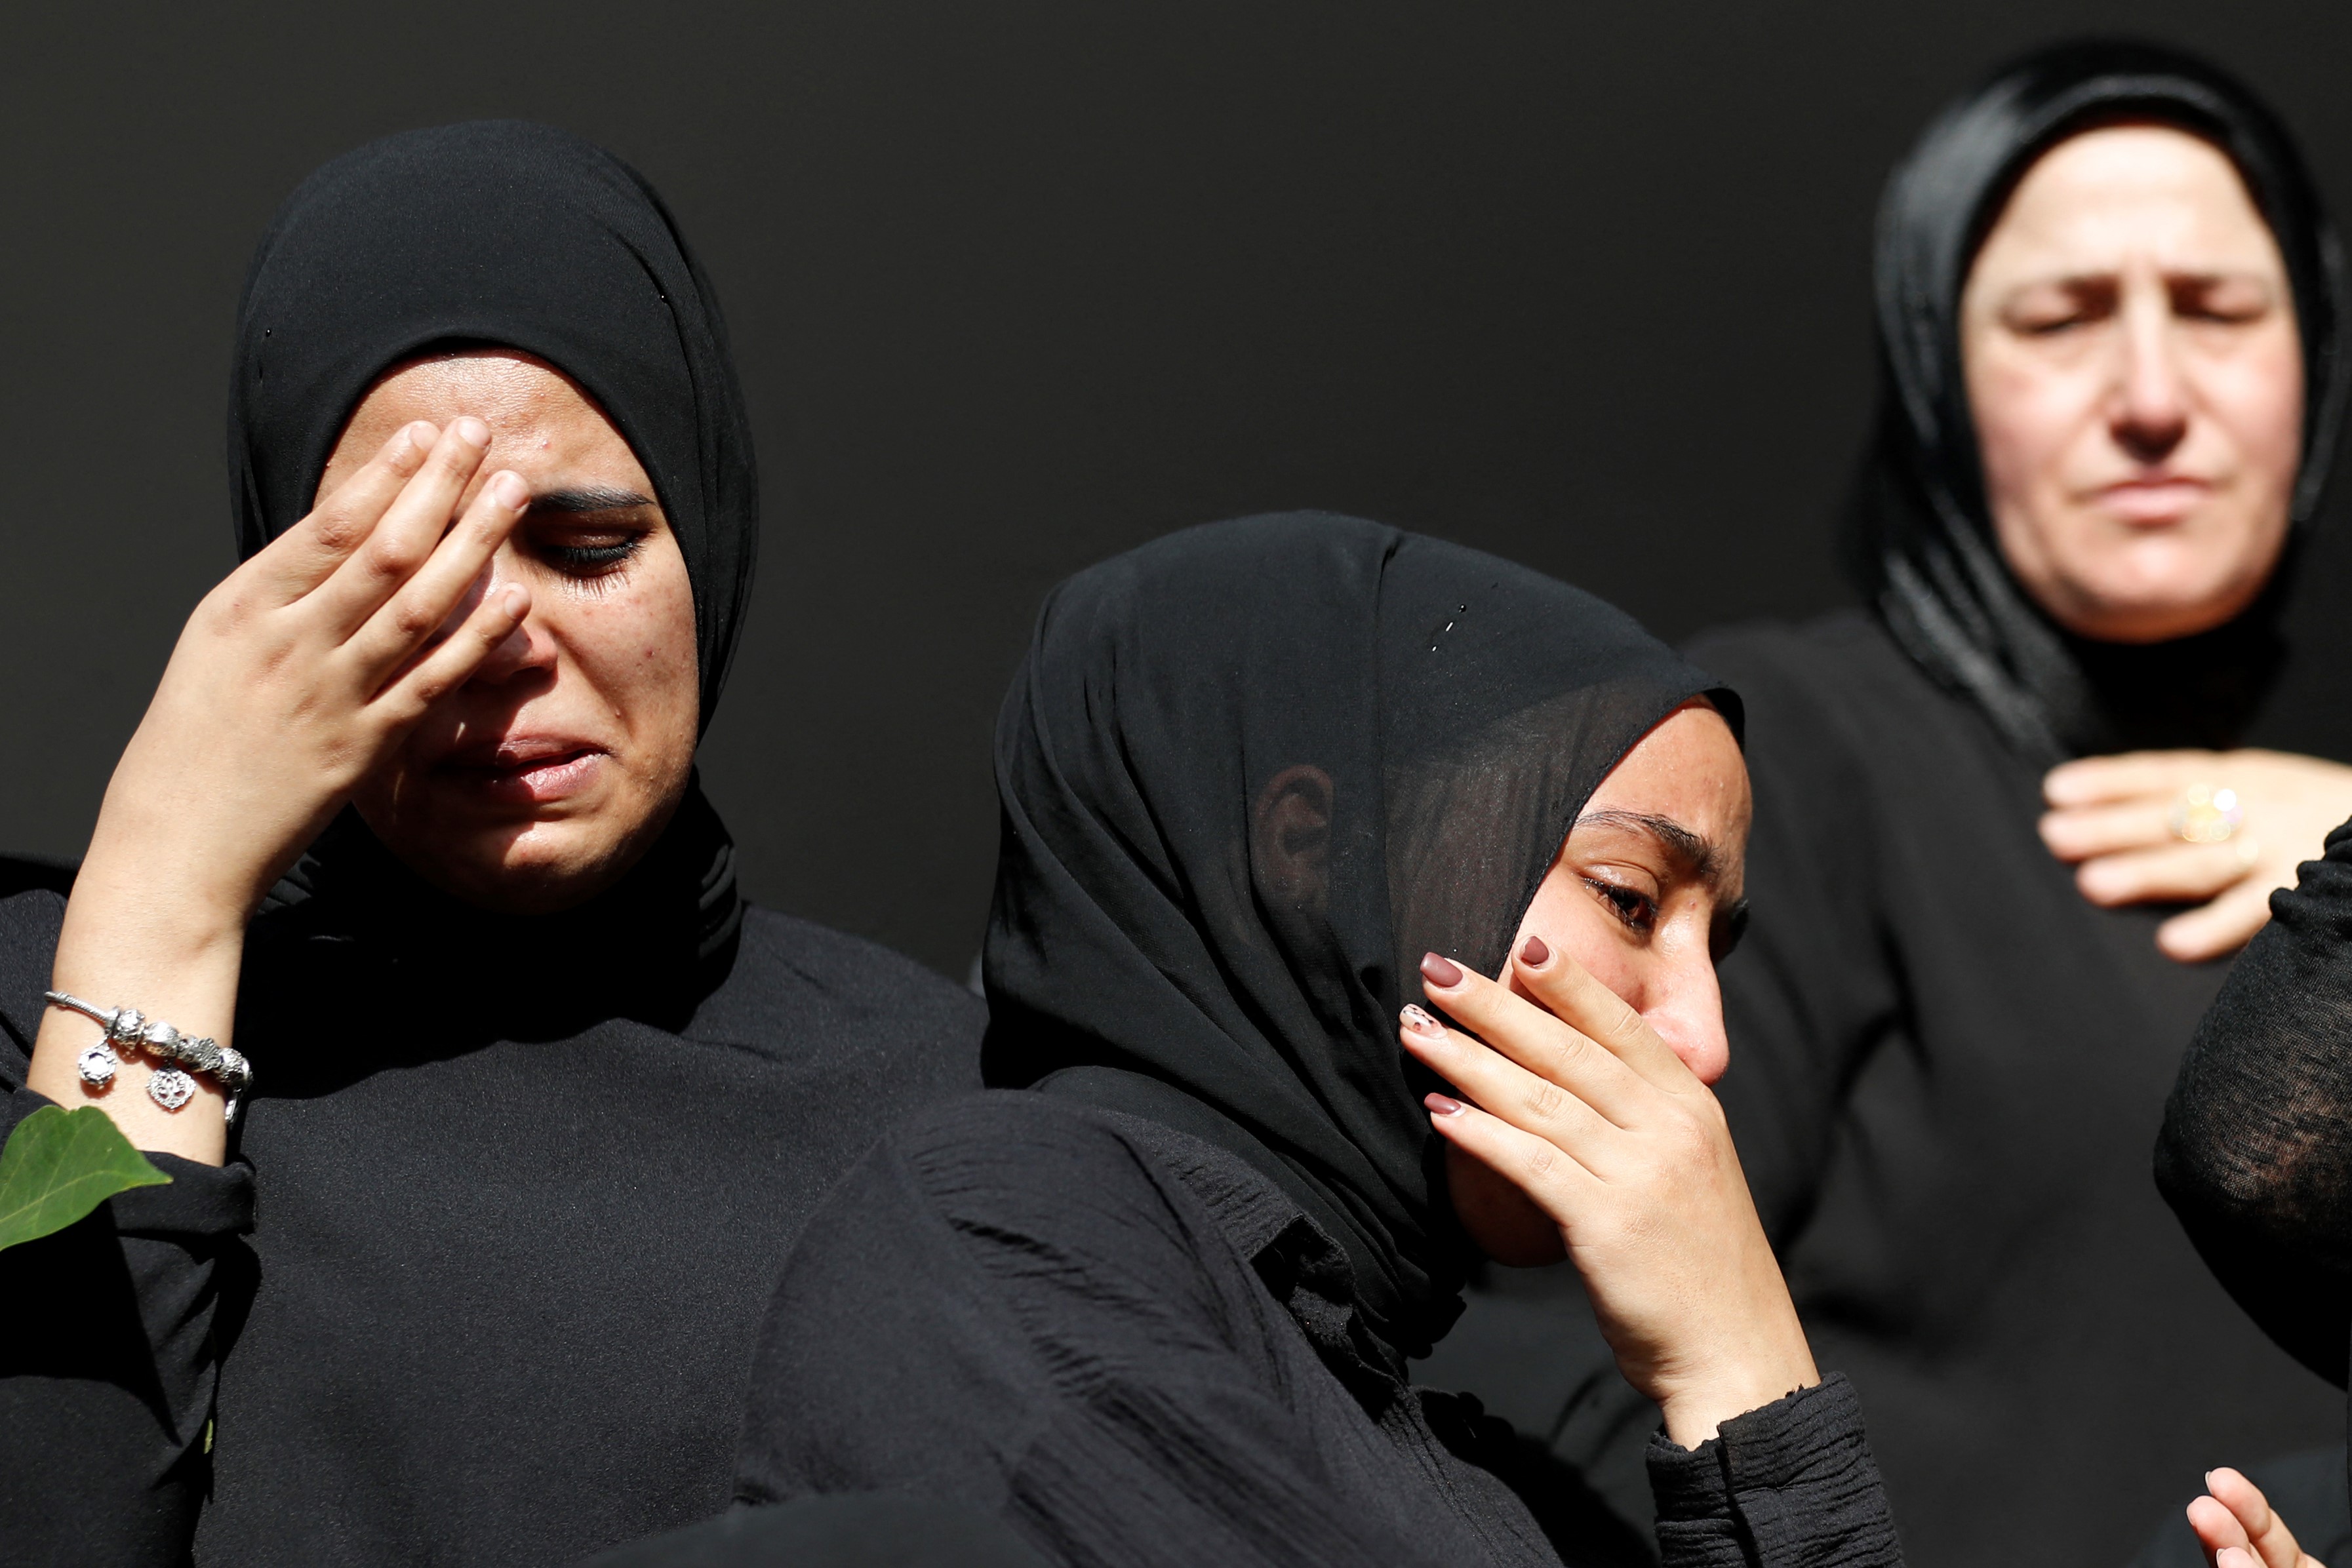 Women mourn the death of Mohammad Kiwan, a 17-year-old Palestinian who succumbed to his wounds after being shot during confrontations with Israeli troops last week, during his funeral in the mostly Arab city of Umm al-Fahm in northern Israel, on May 20, 2021.